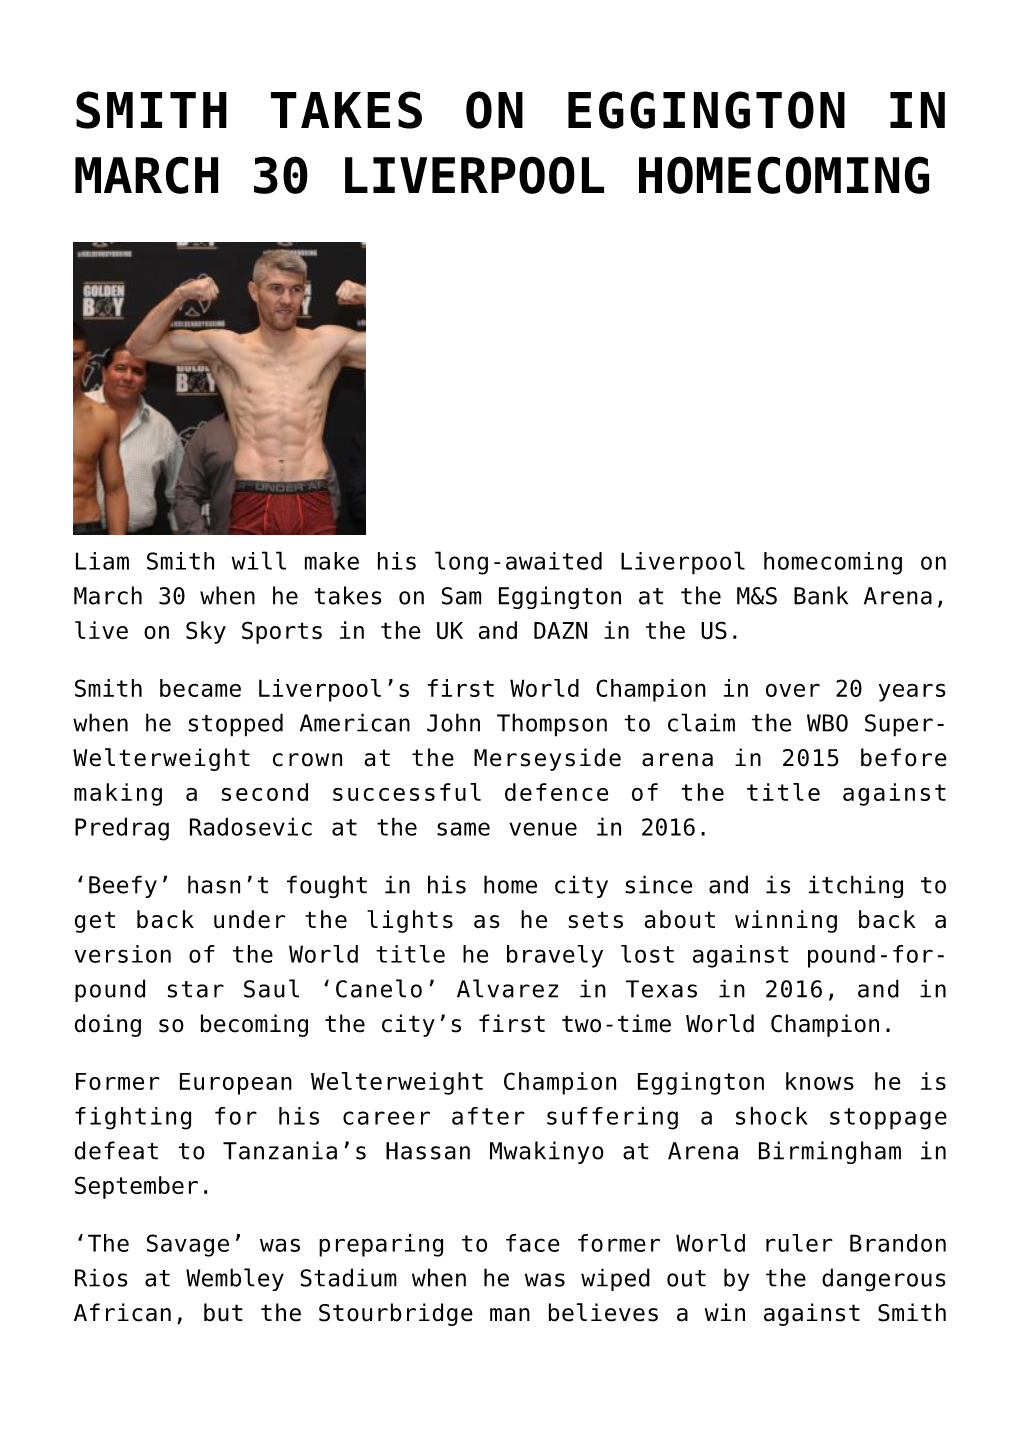 Smith Takes on Eggington in March 30 Liverpool Homecoming